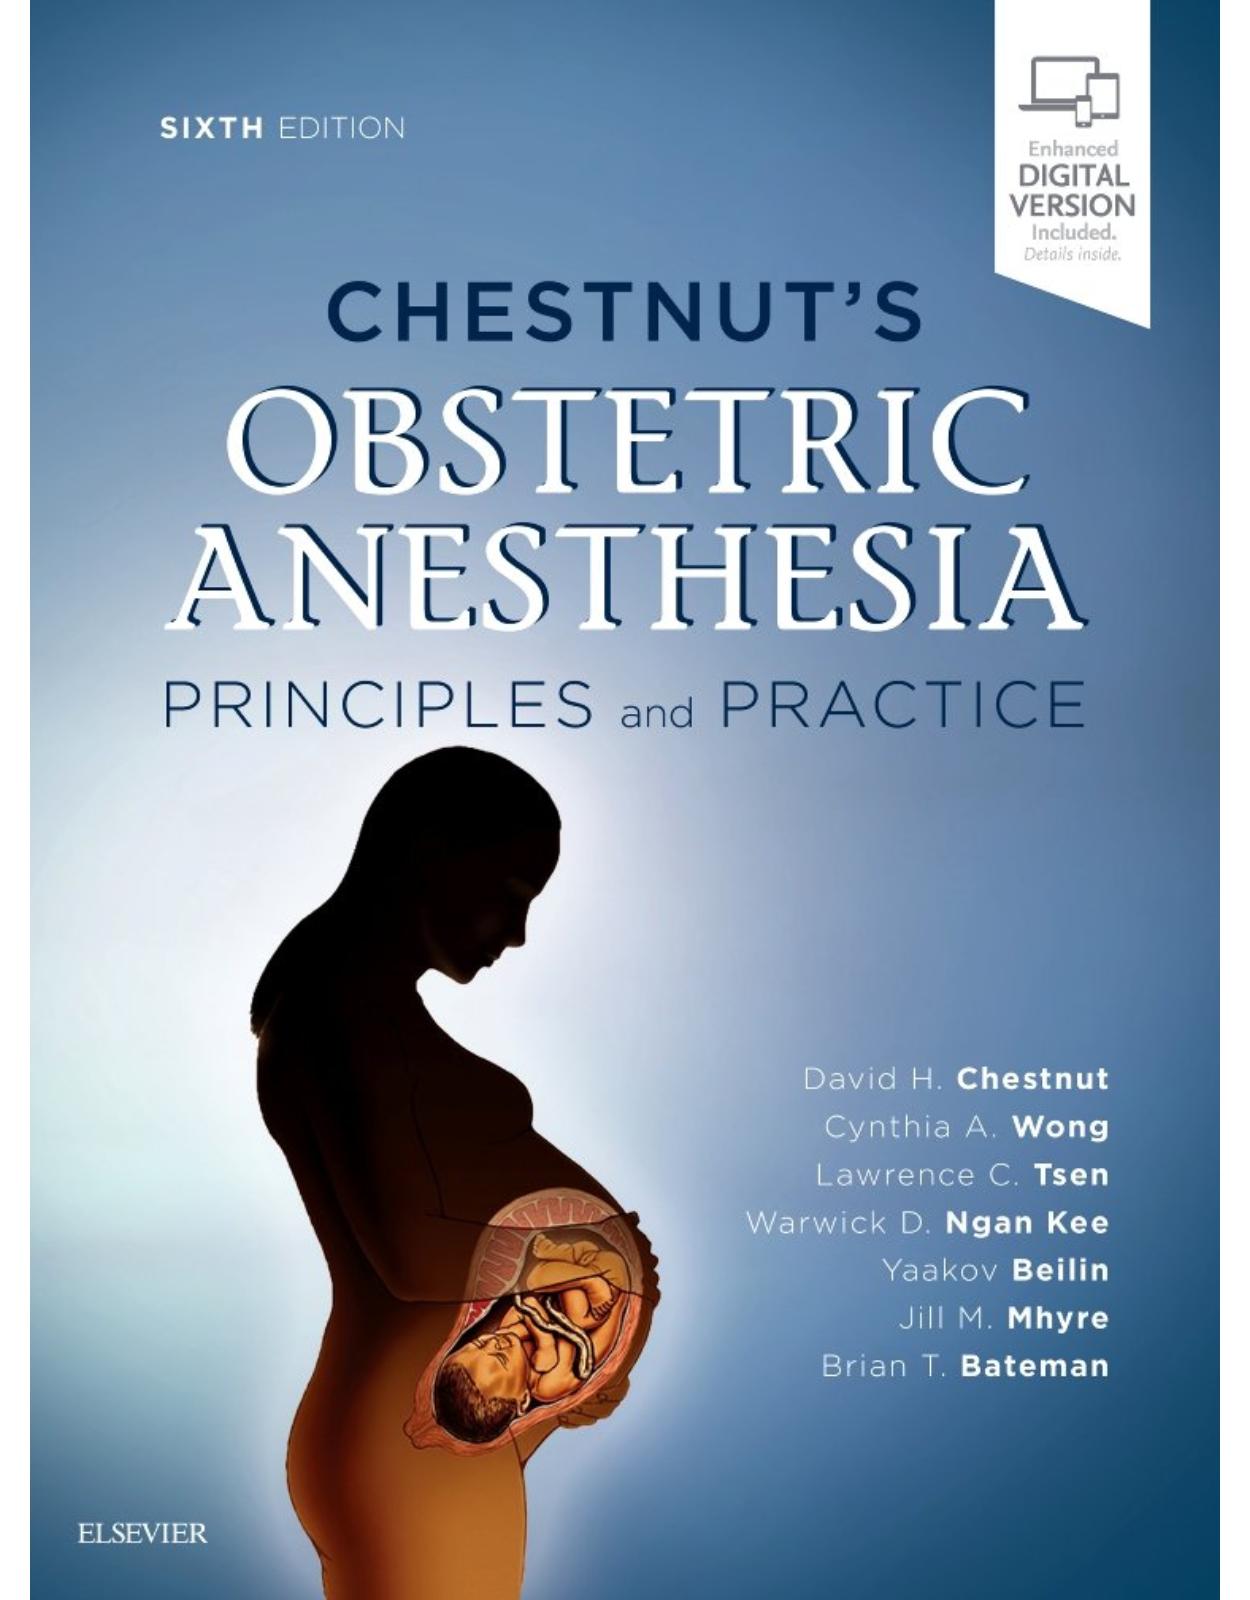 Chestnut's Obstetric Anesthesia, 6e: Expert Consult - Online and Print 